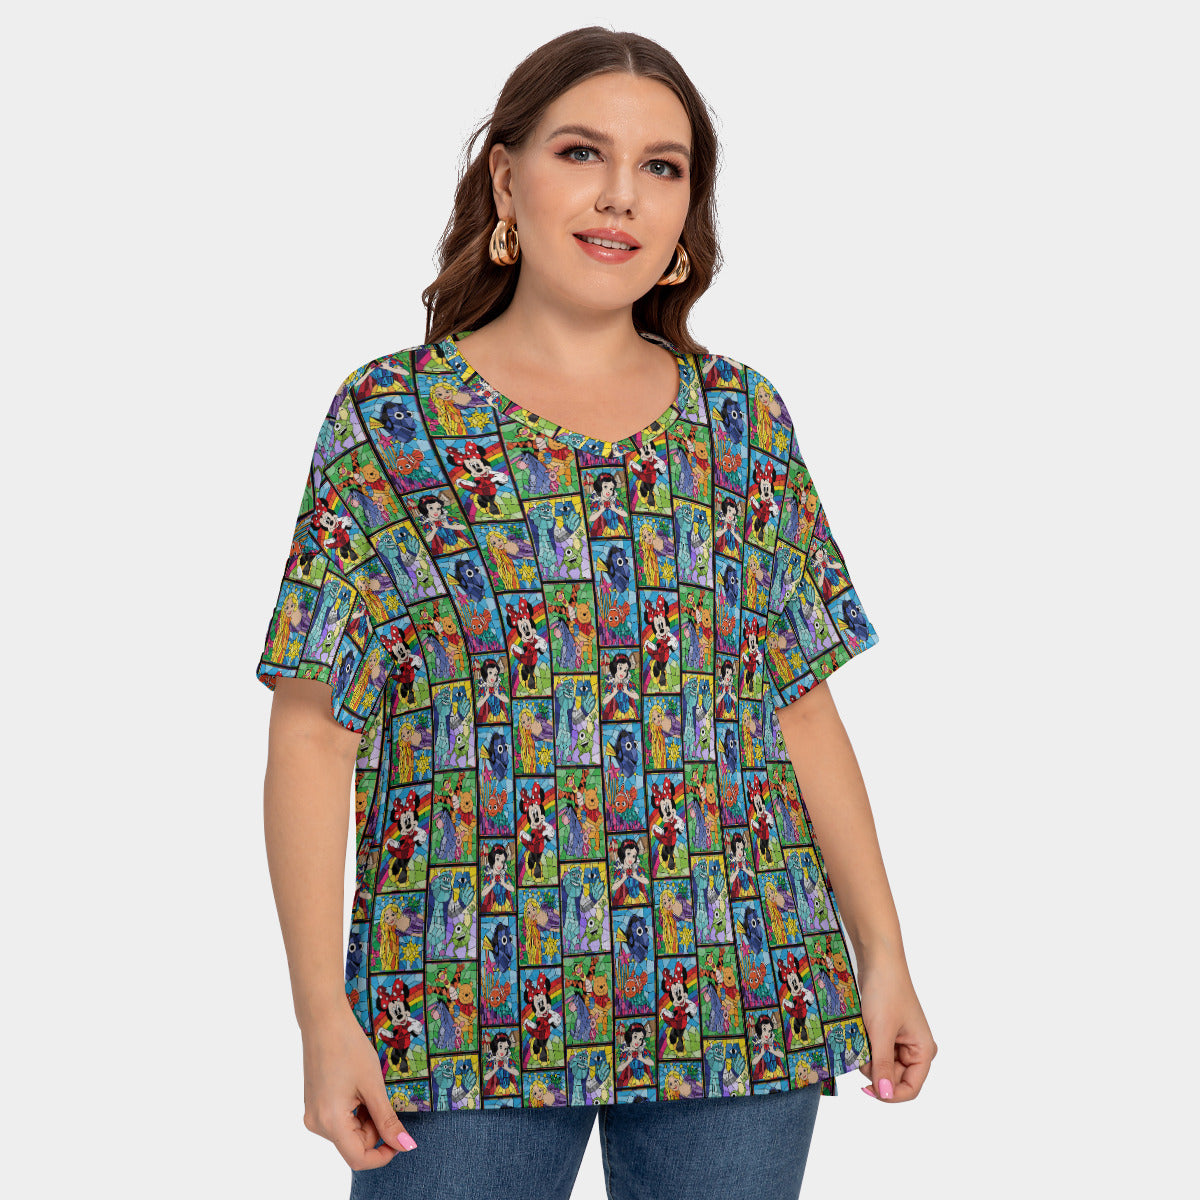 Stained Glass Characters Women's Plus Size Short Sleeve T-shirt With Sleeve Loops